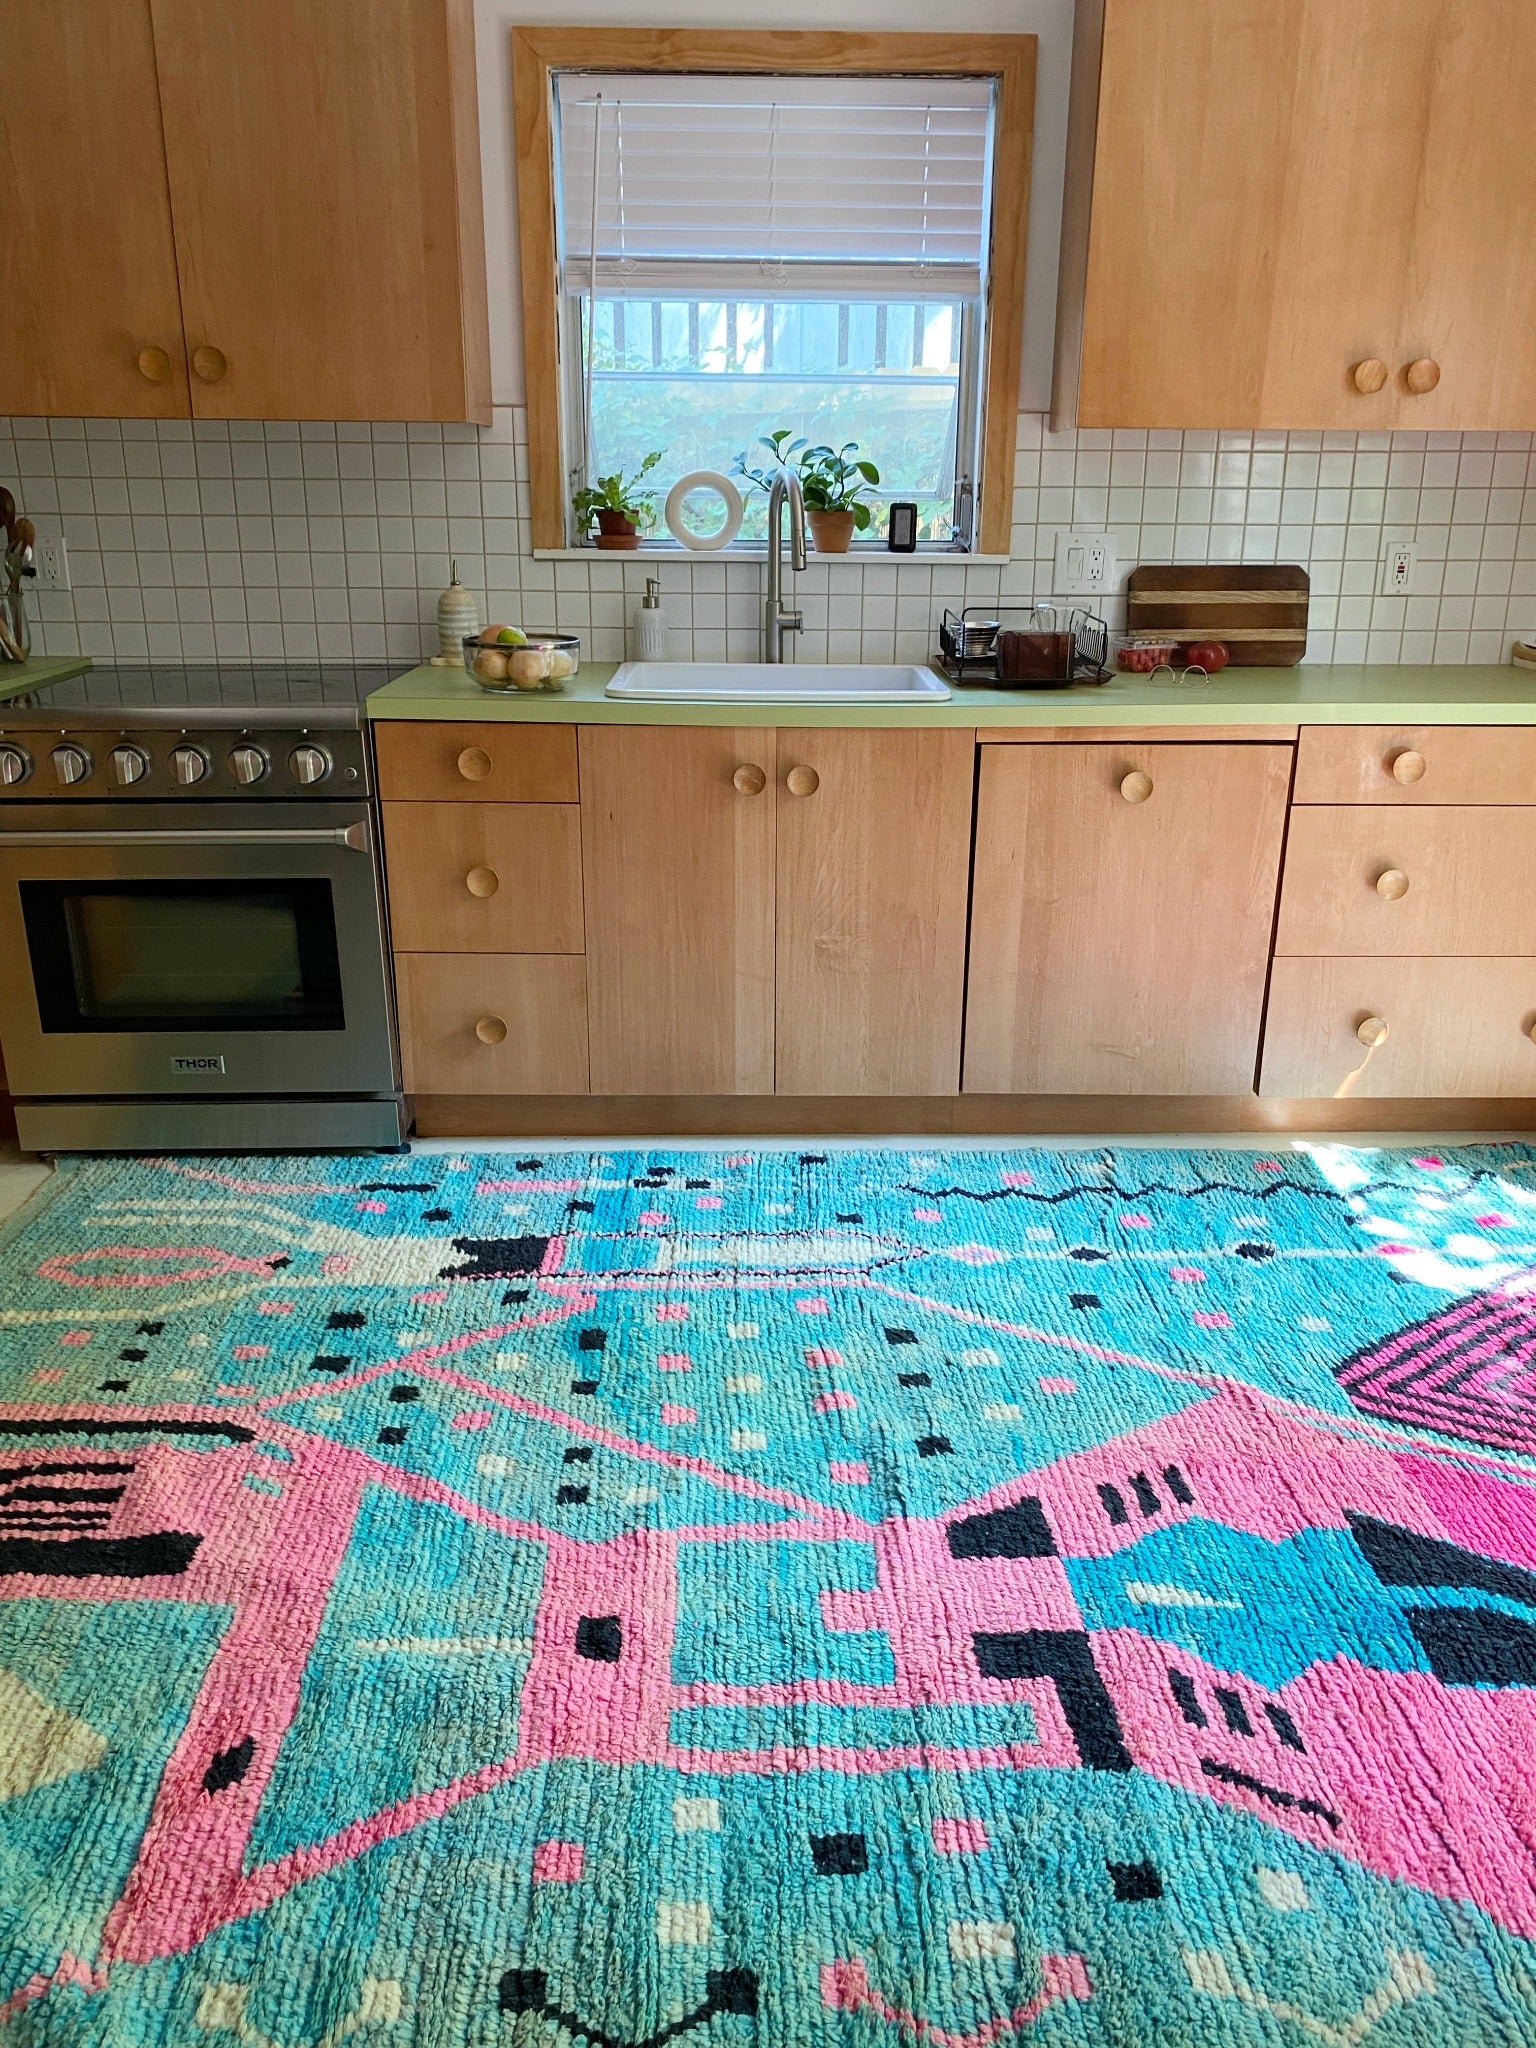 Chablis Moroccan Rug Styled in a Kitchen